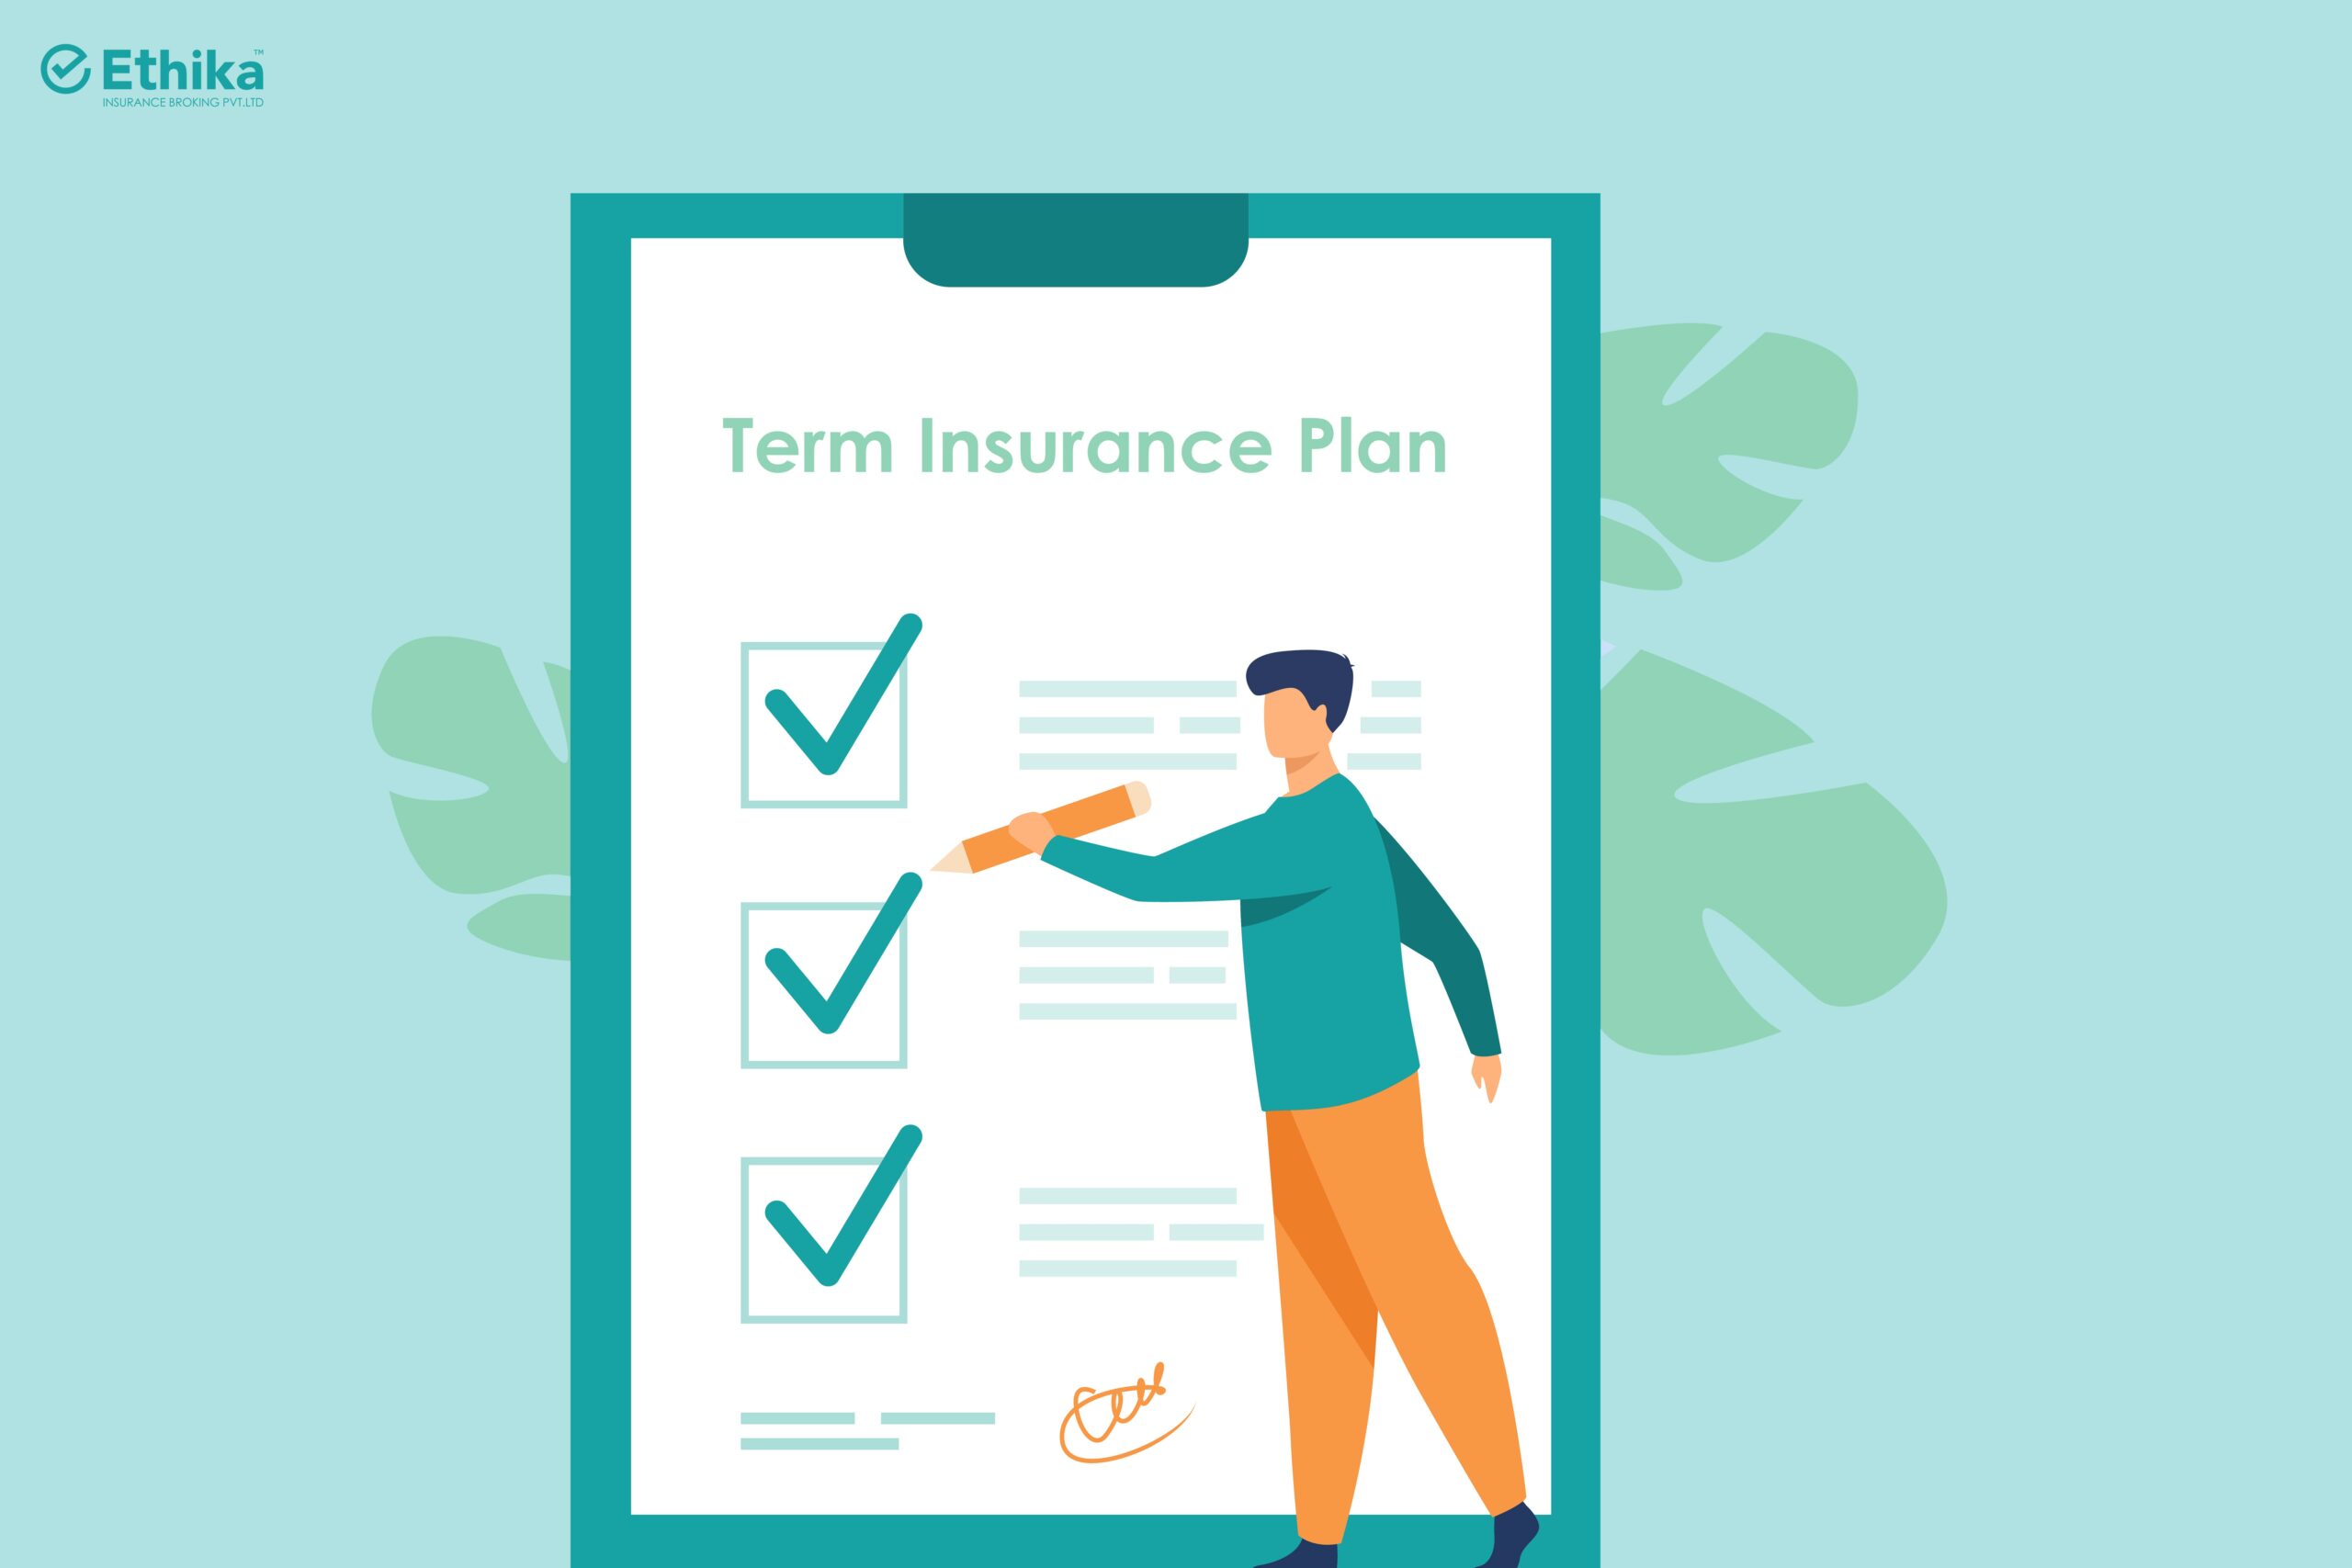 Right Term Insurance Plan - Vector image having check boxes